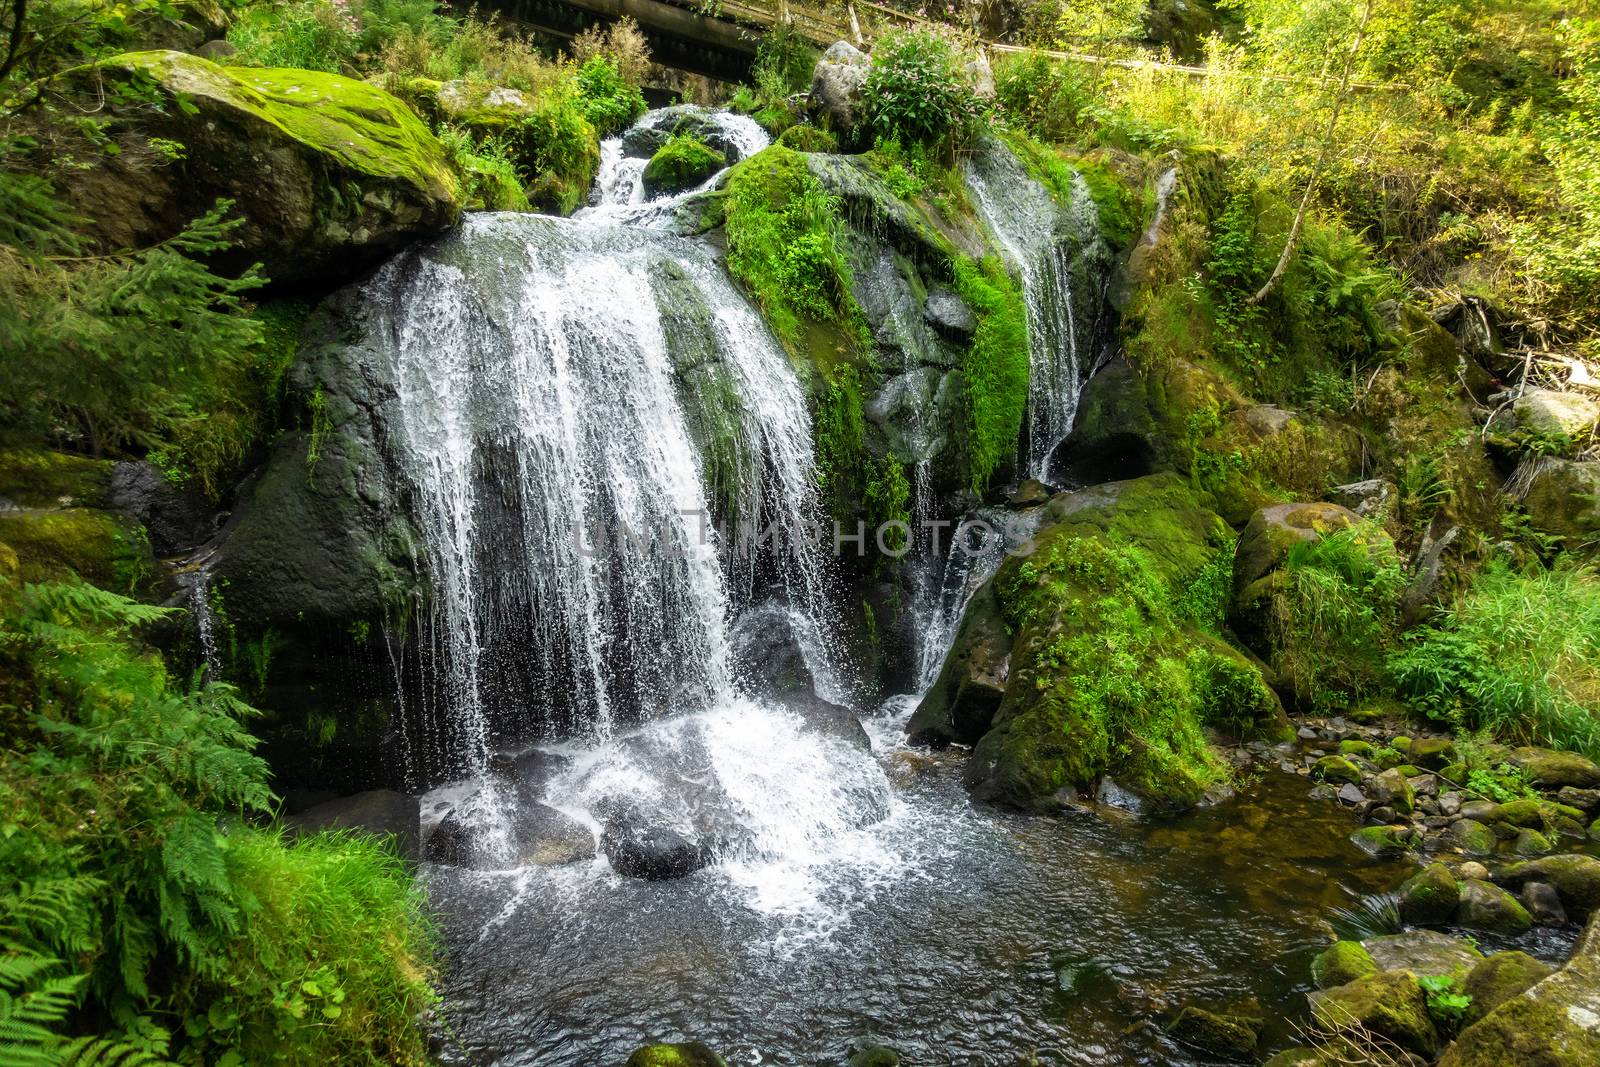 An image of the waterfall at Triberg in the black forest area Germany